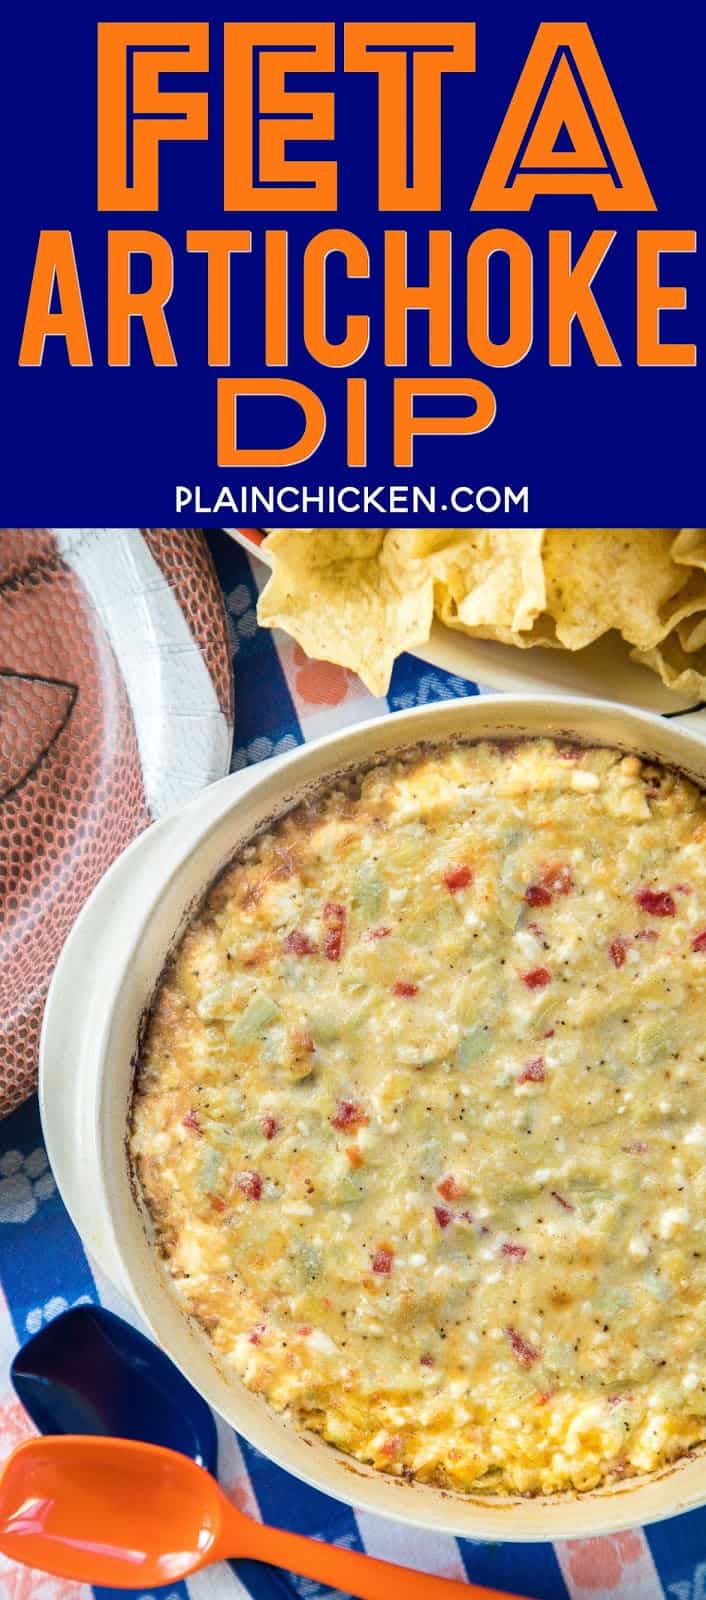 Feta Artichoke Dip - seriously delicious!!! SO simple and this tastes amazing! Only 6 ingredients - feta, artichokes, pimentos, garlic, parmesan and mayonnaise. Can mae ahead of time and refrigerate until ready to bake. Ready to eat in under 30 minutes. Always the first thing to go at parties!! #appetizer #superbowl #tailgating